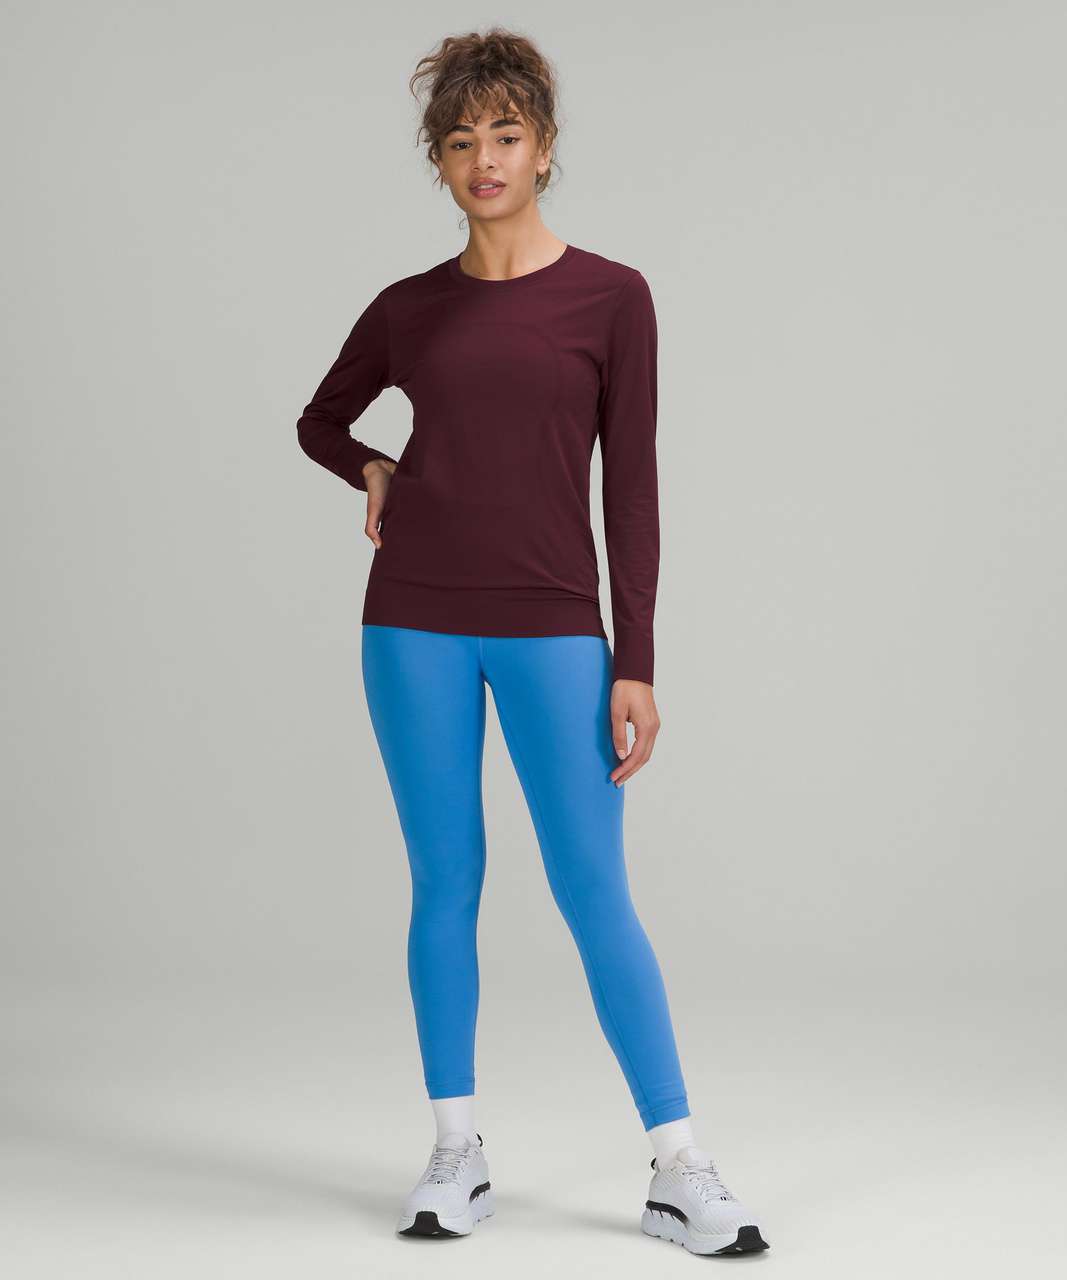 Lululemon Swiftly Relaxed Long Sleeve Shirt - Cassis / Cassis